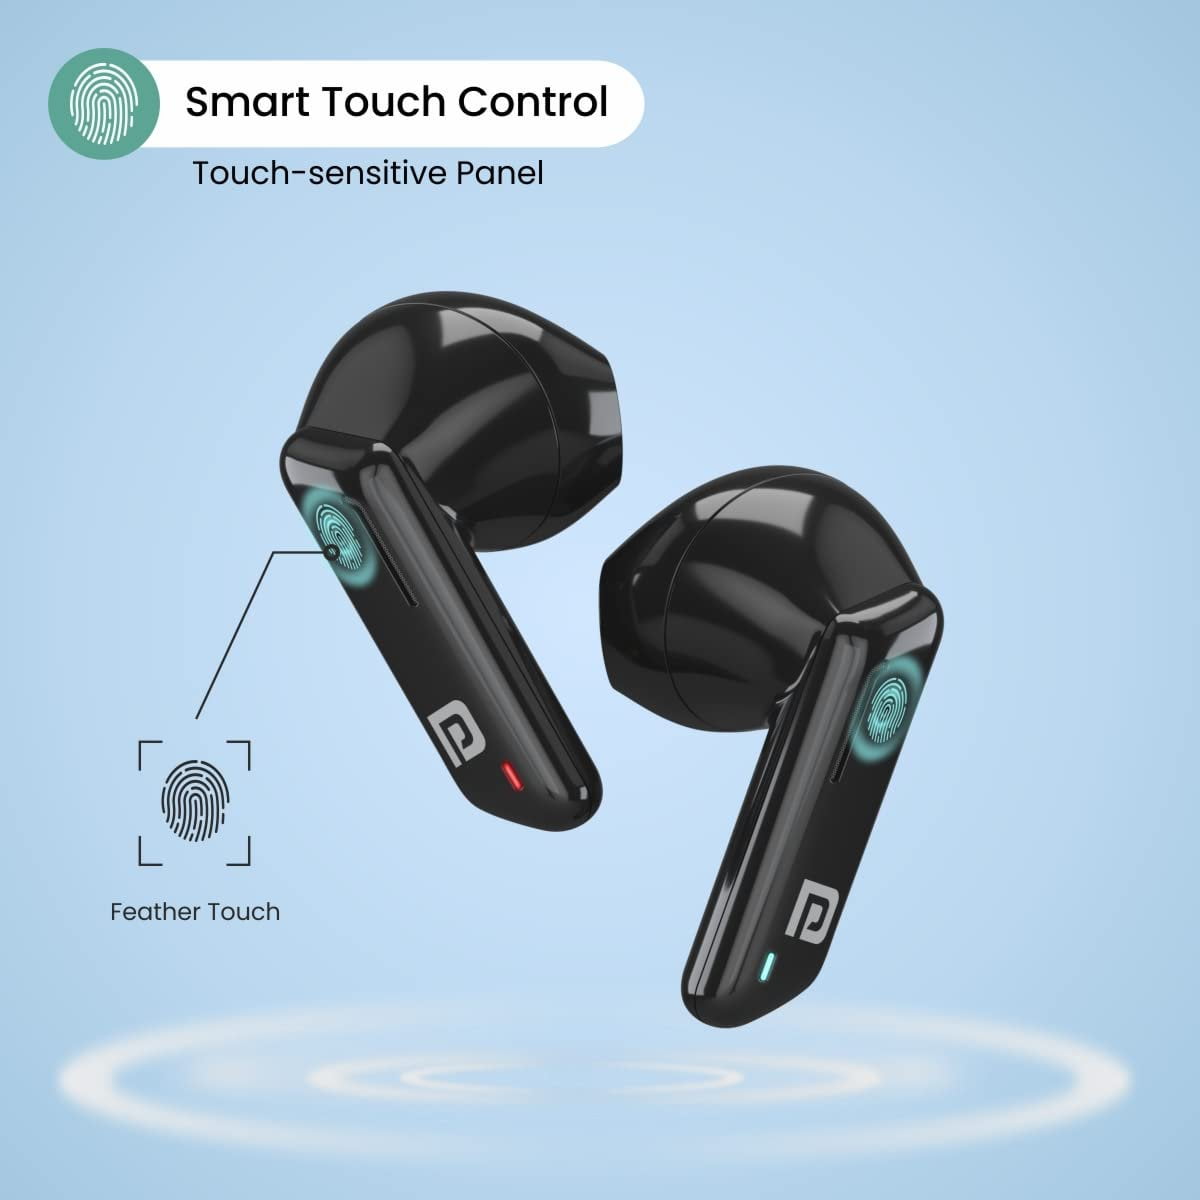 Harmonics Twins 11 Earbuds 7 Shop Mobile Accessories Online in India